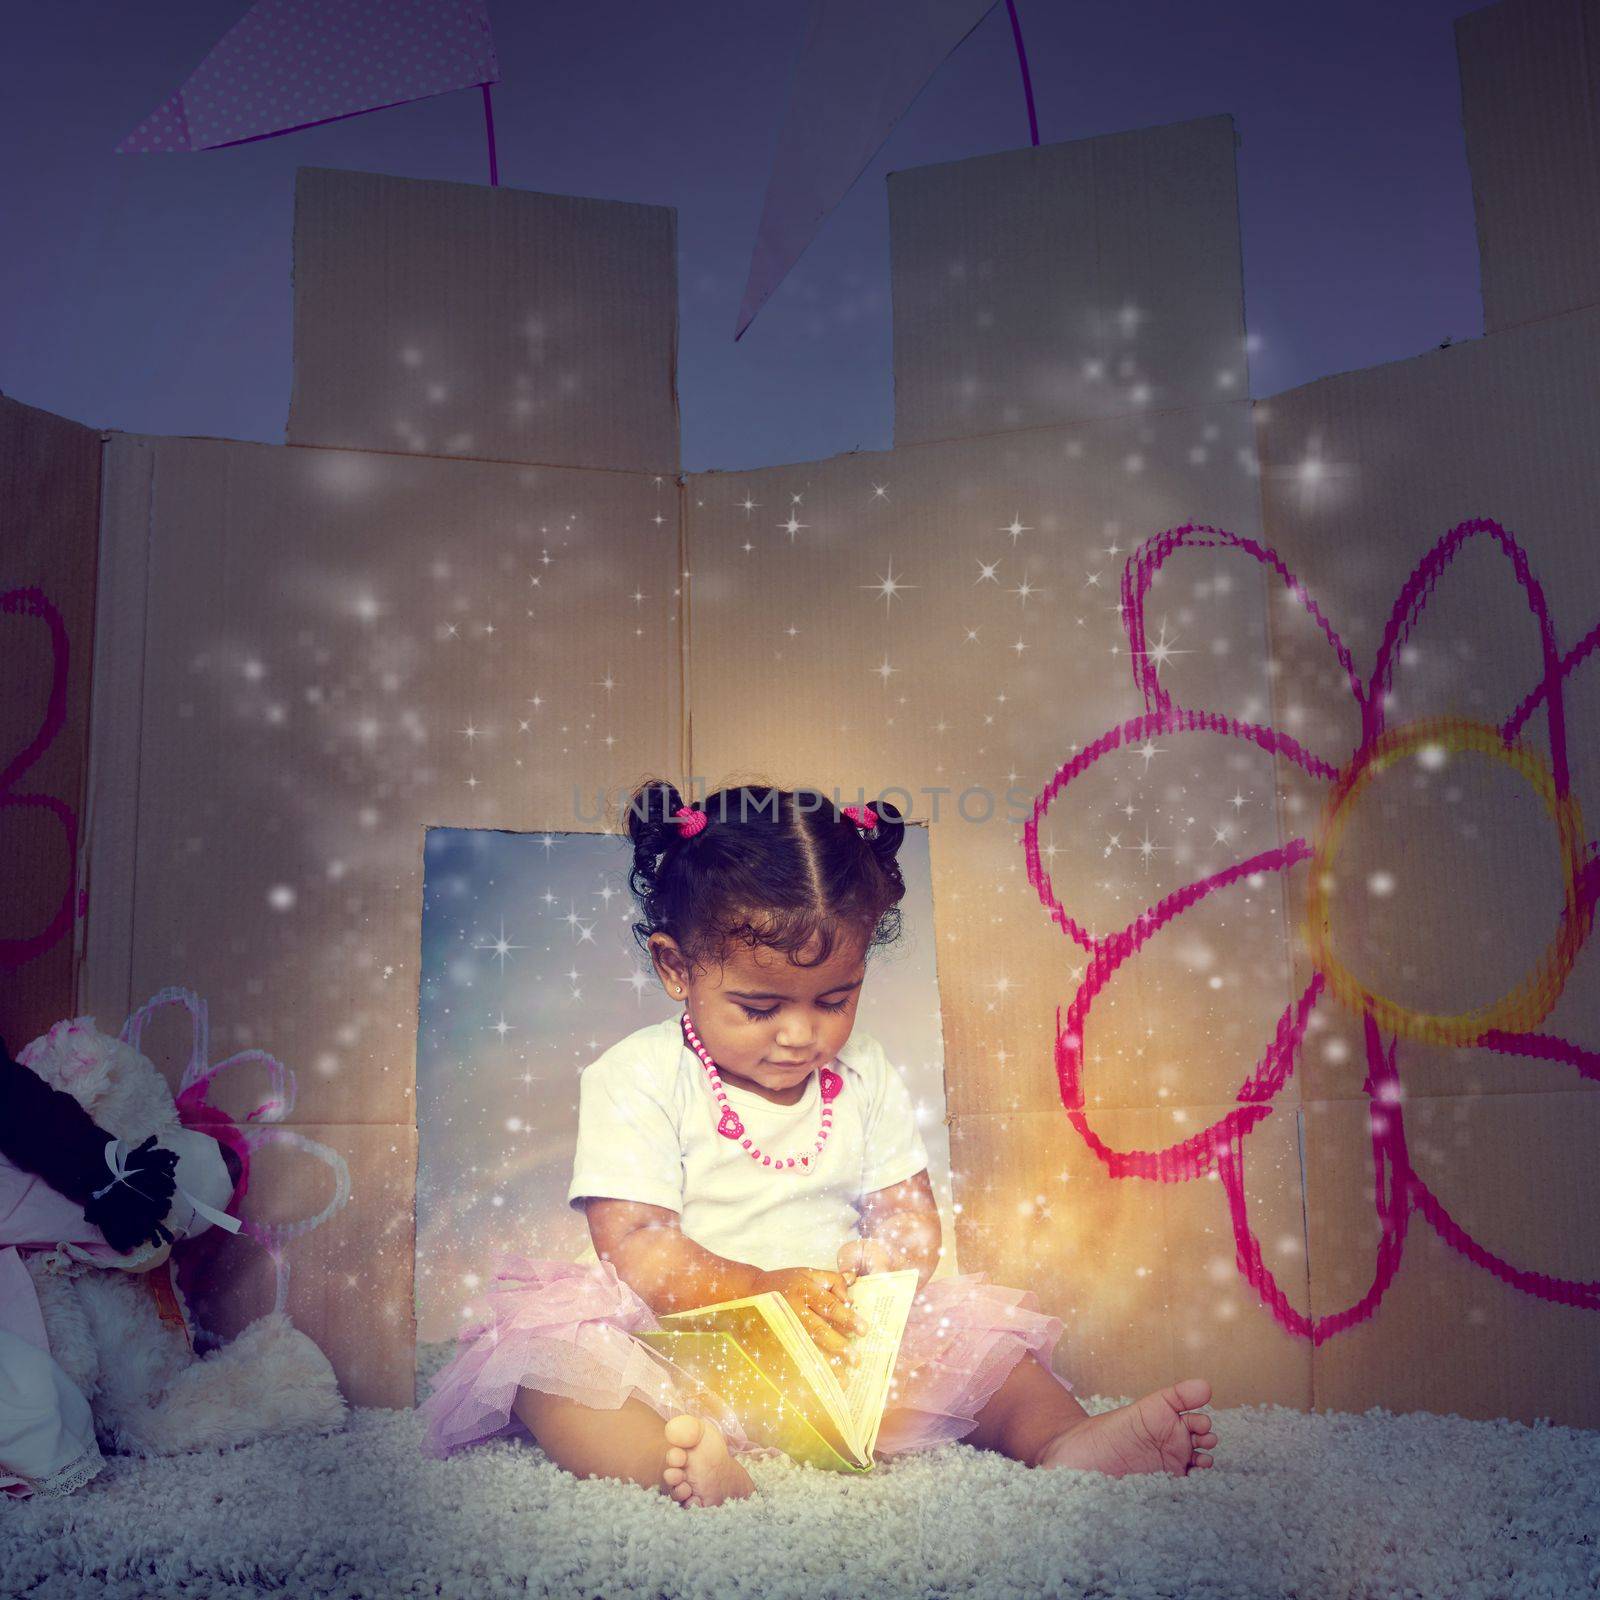 Her very first fairytale. an adorable little girl sitting on the floor and reading a glowing book